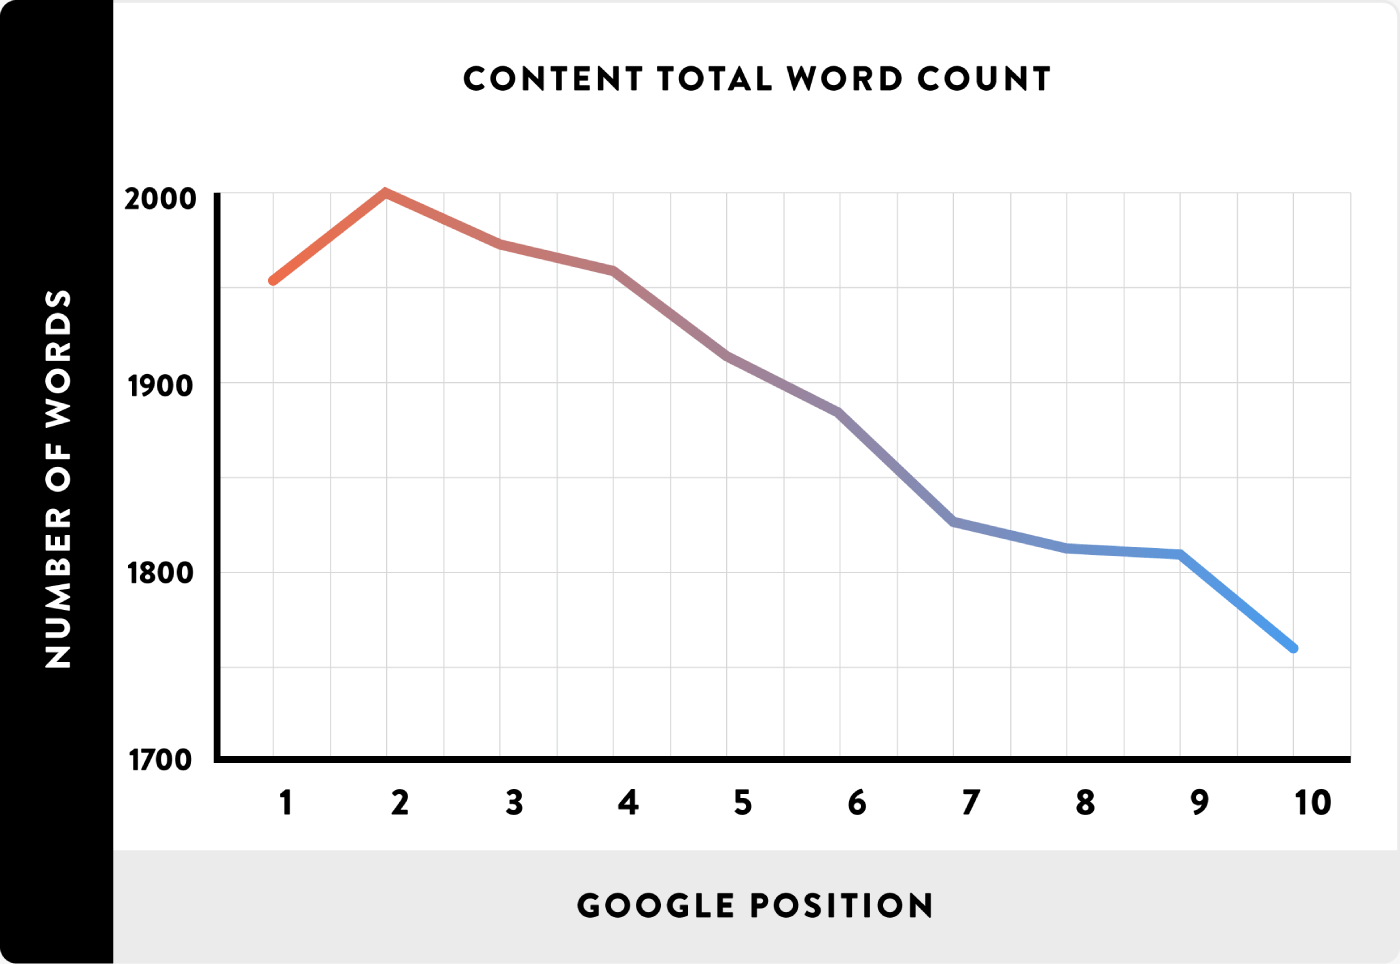 Content total word count